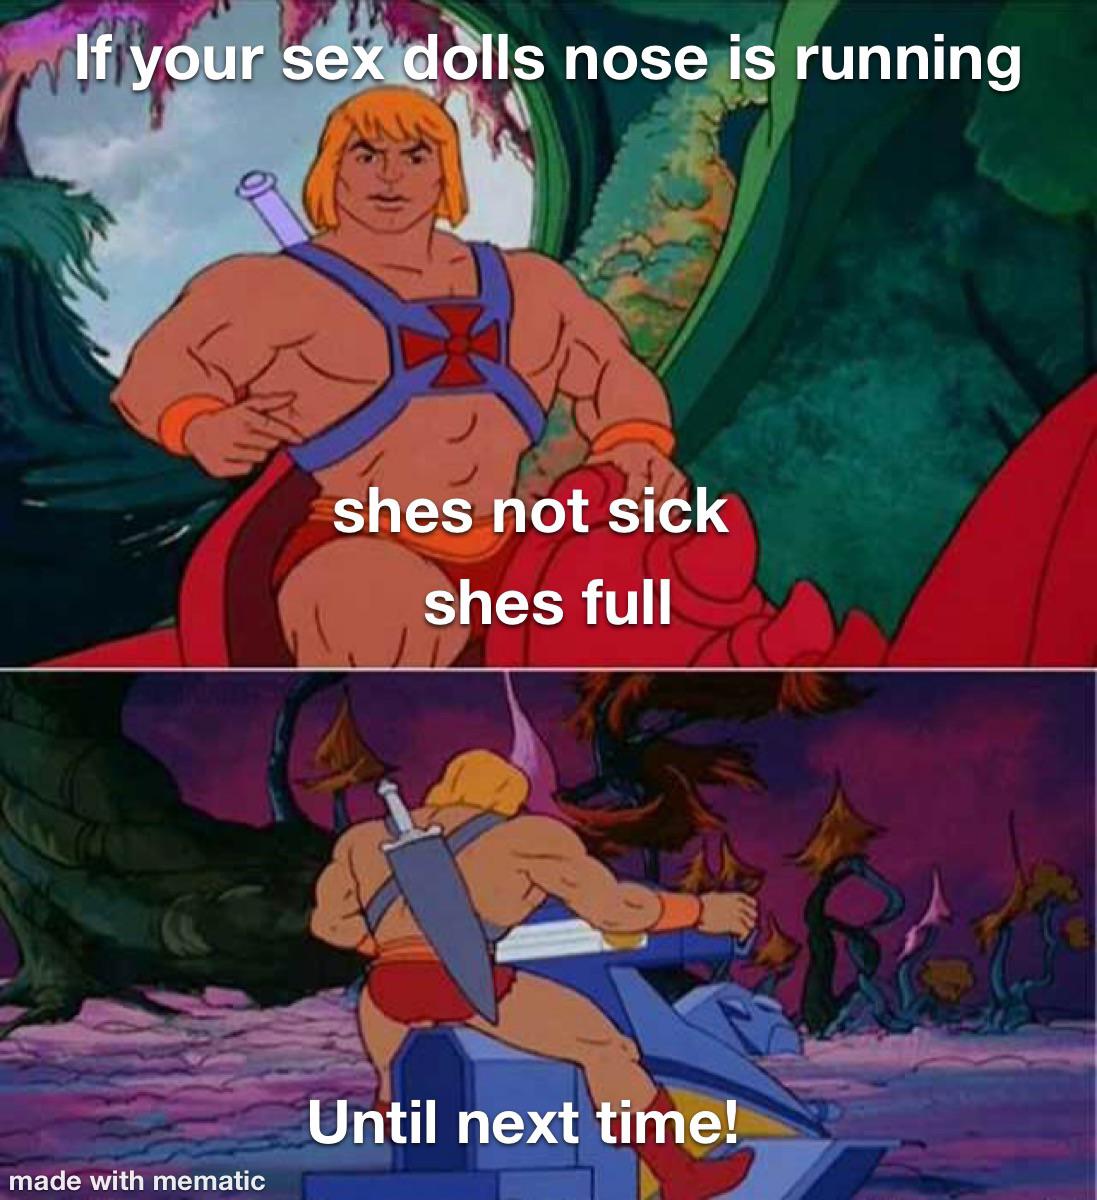 funny memes and pics - meme heman - If your sex dolls nose is running made with mematic shes not sick shes full Until next time!